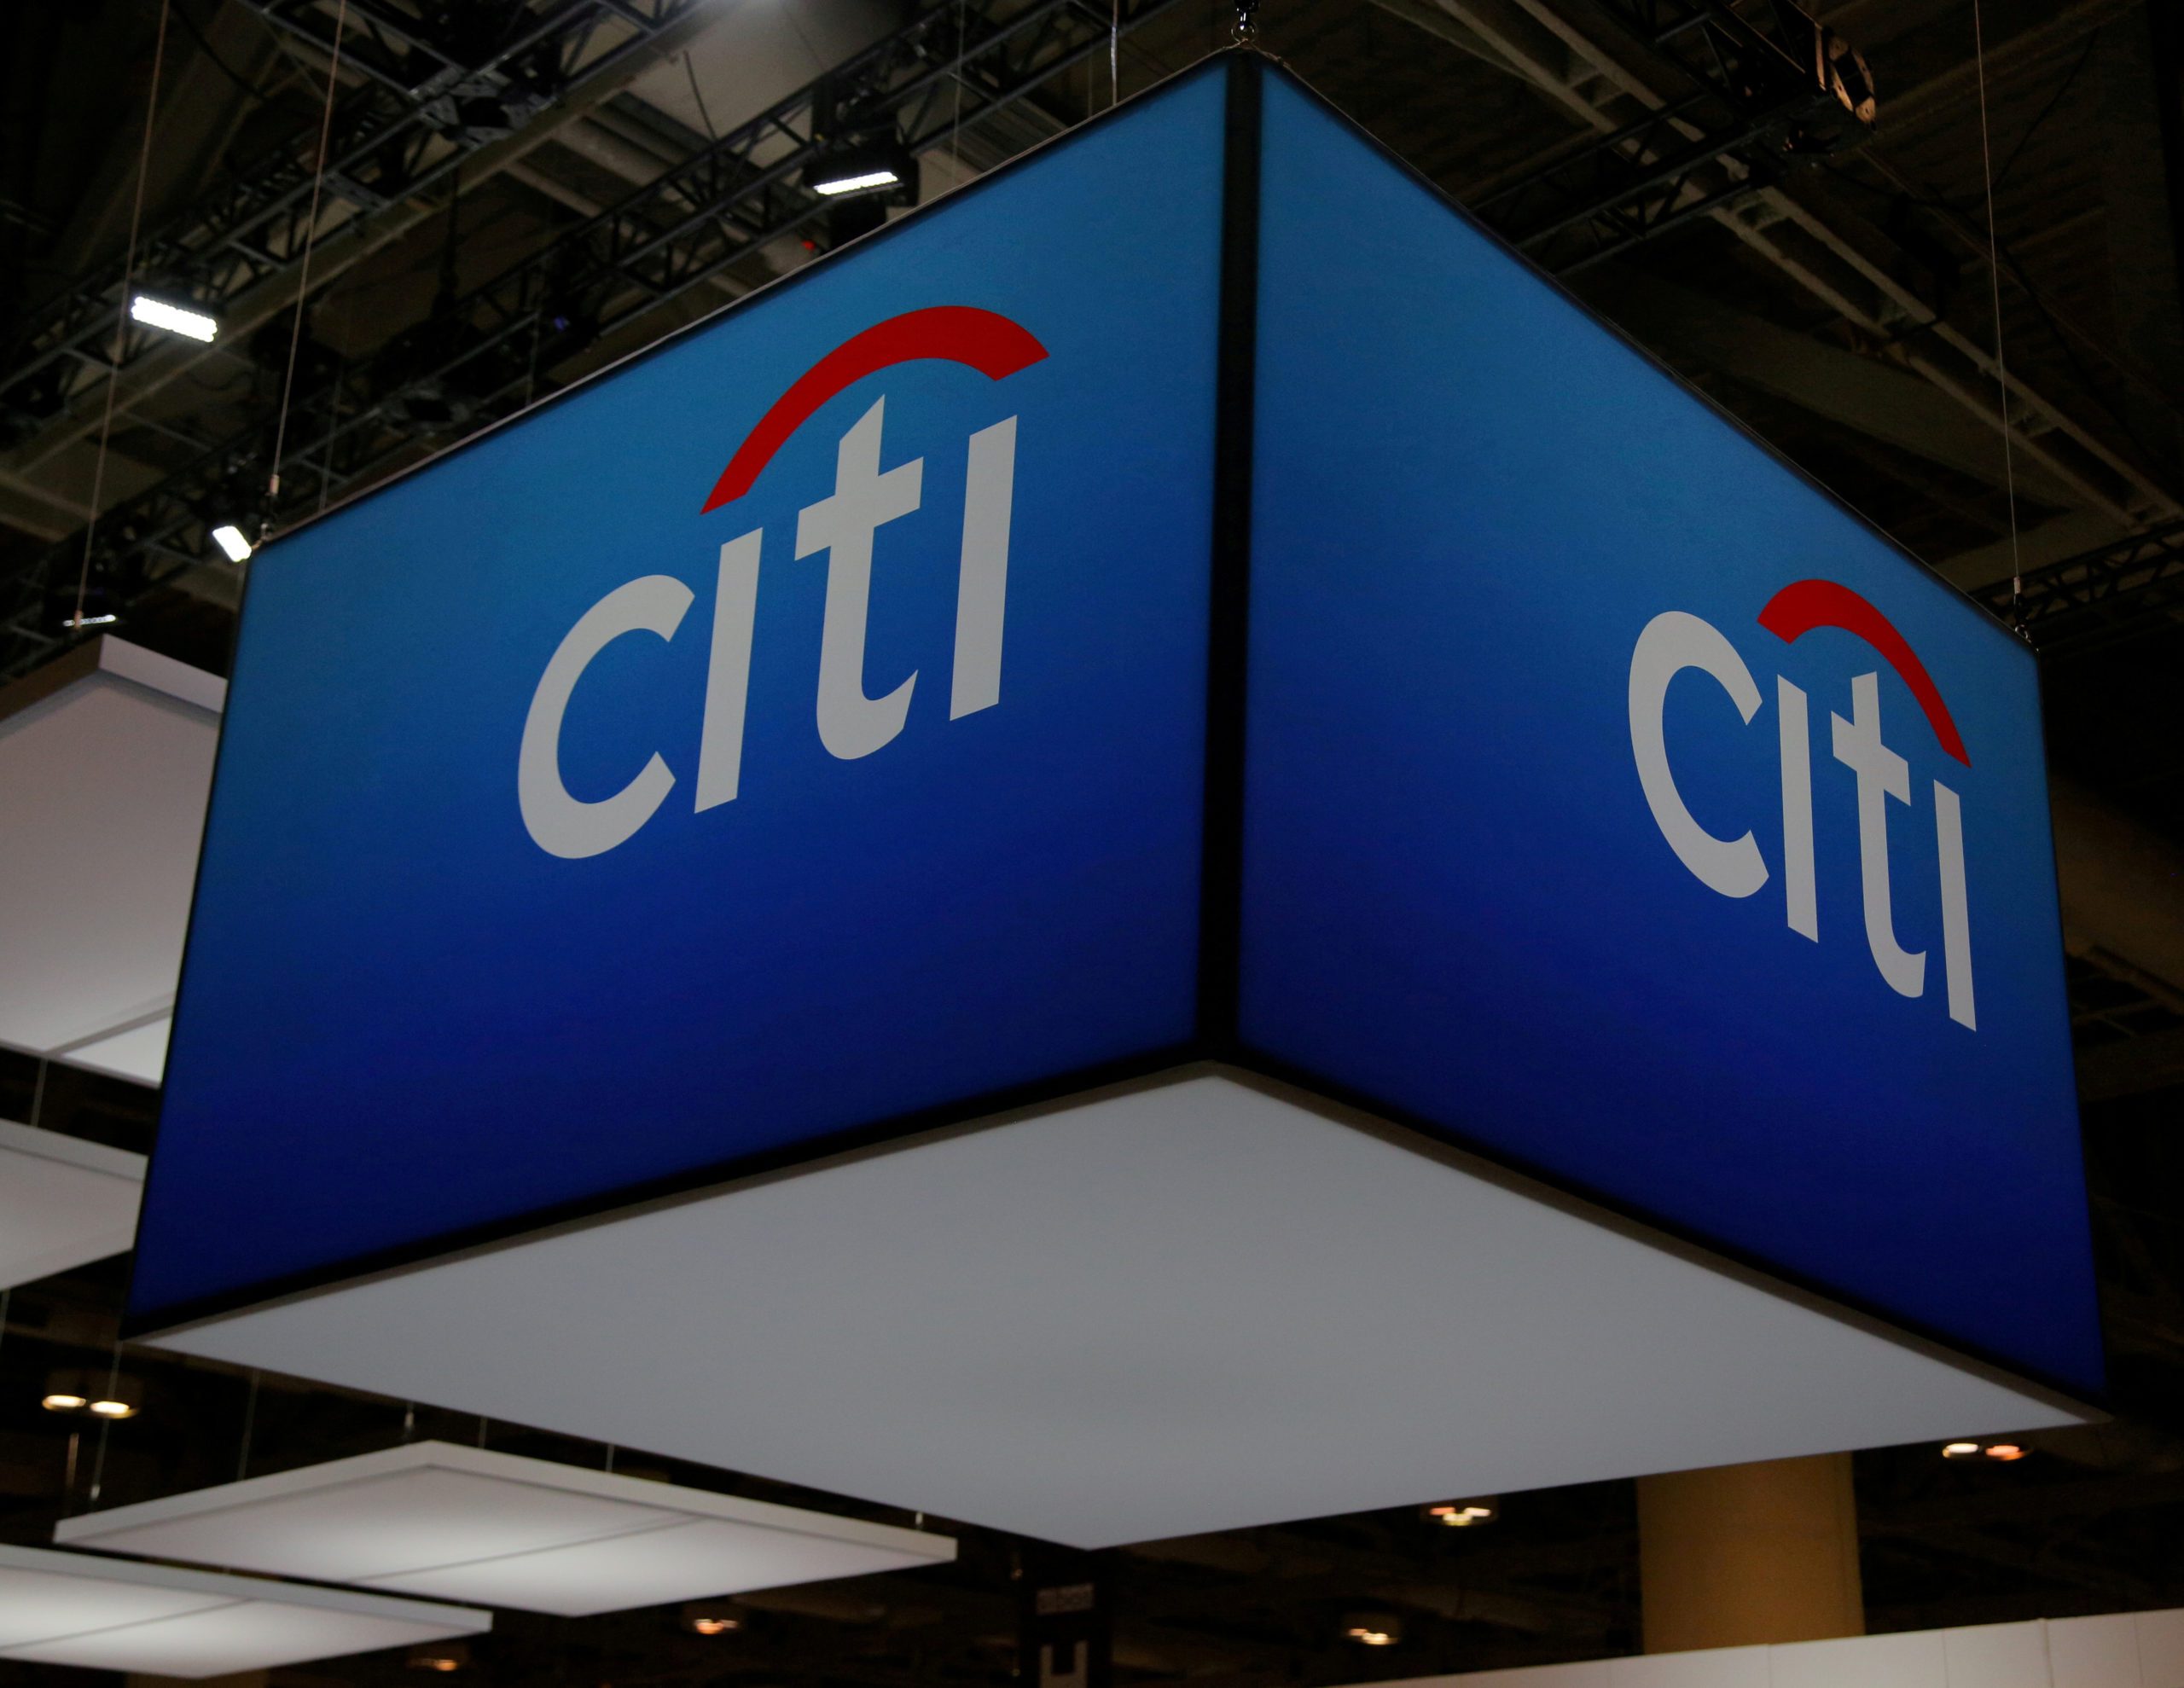 China to further open up financial sector, regulator tells Citigroup CEO